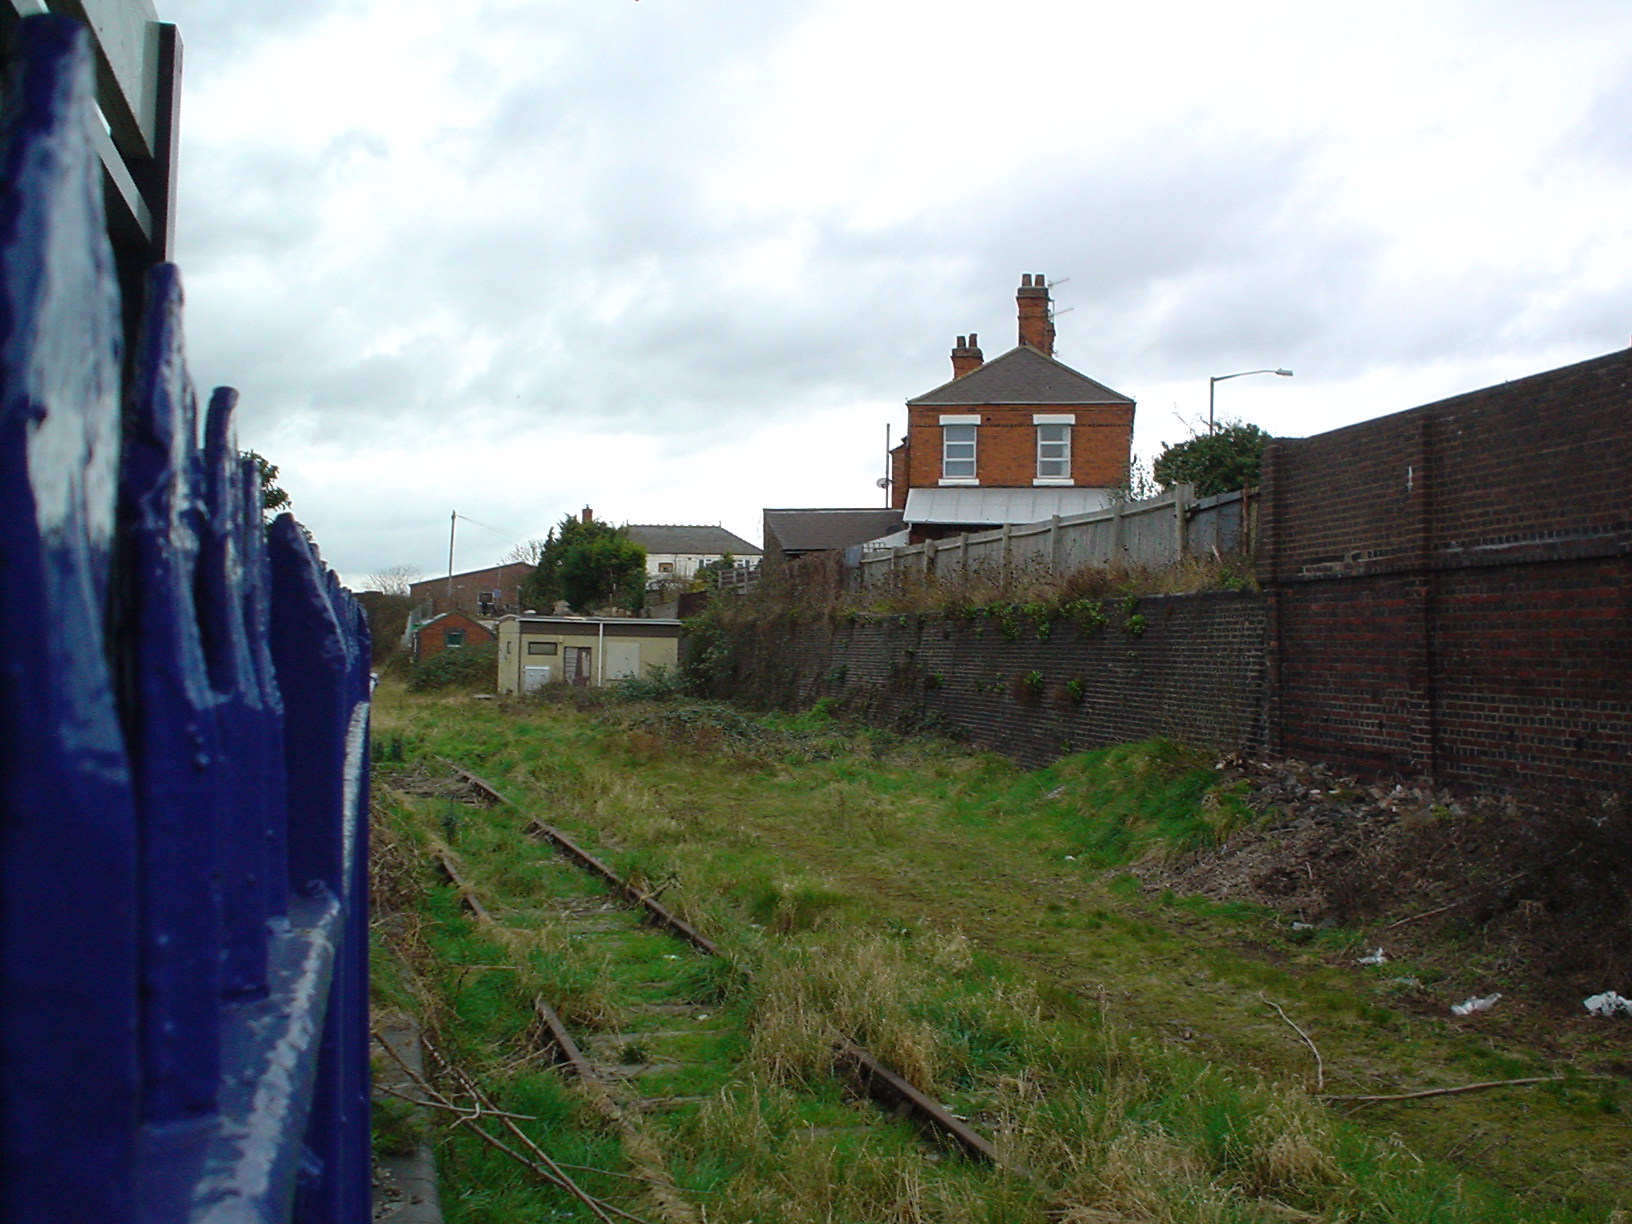 an abandoned train yard with a brick house in the background